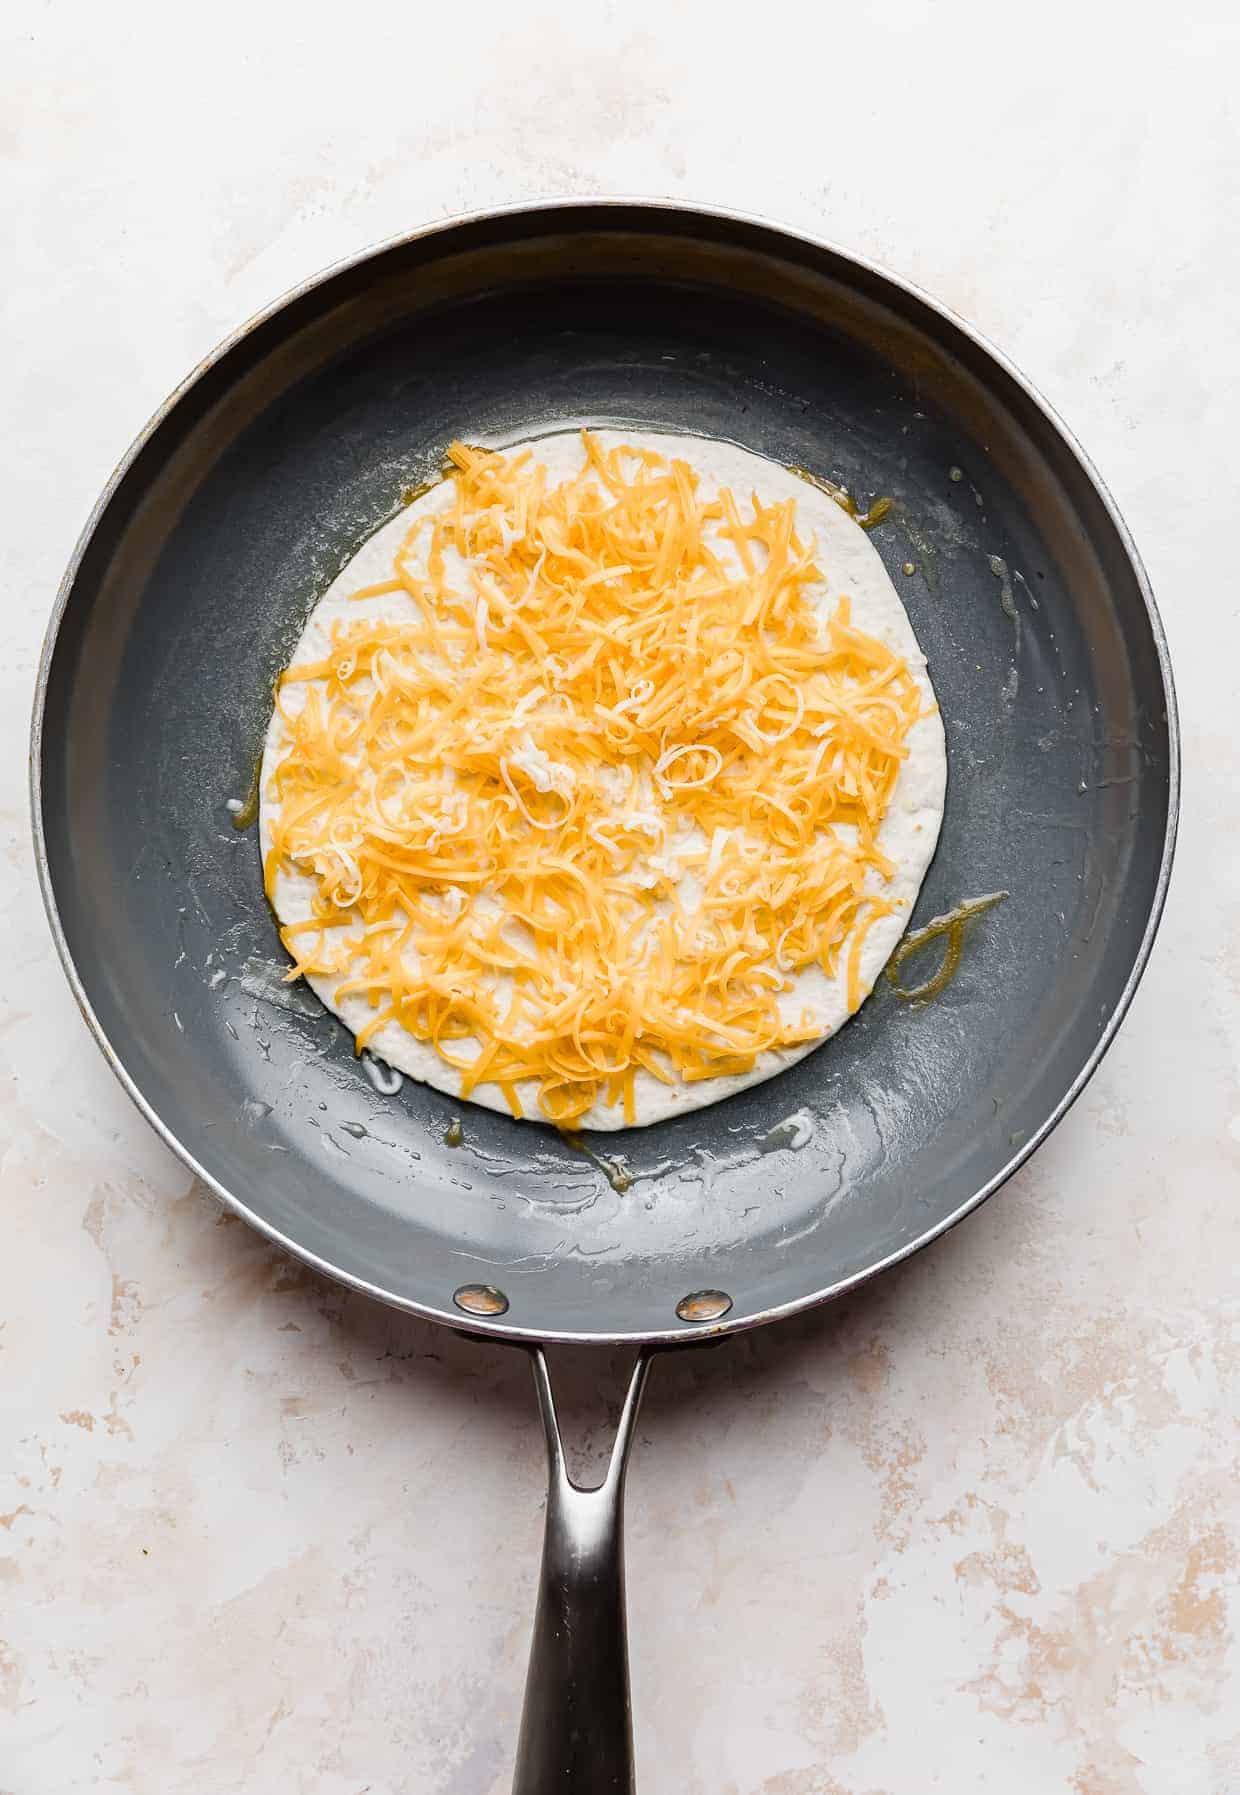 A frying pan with a quesadilla in it that has been topped with shredded cheddar cheese.